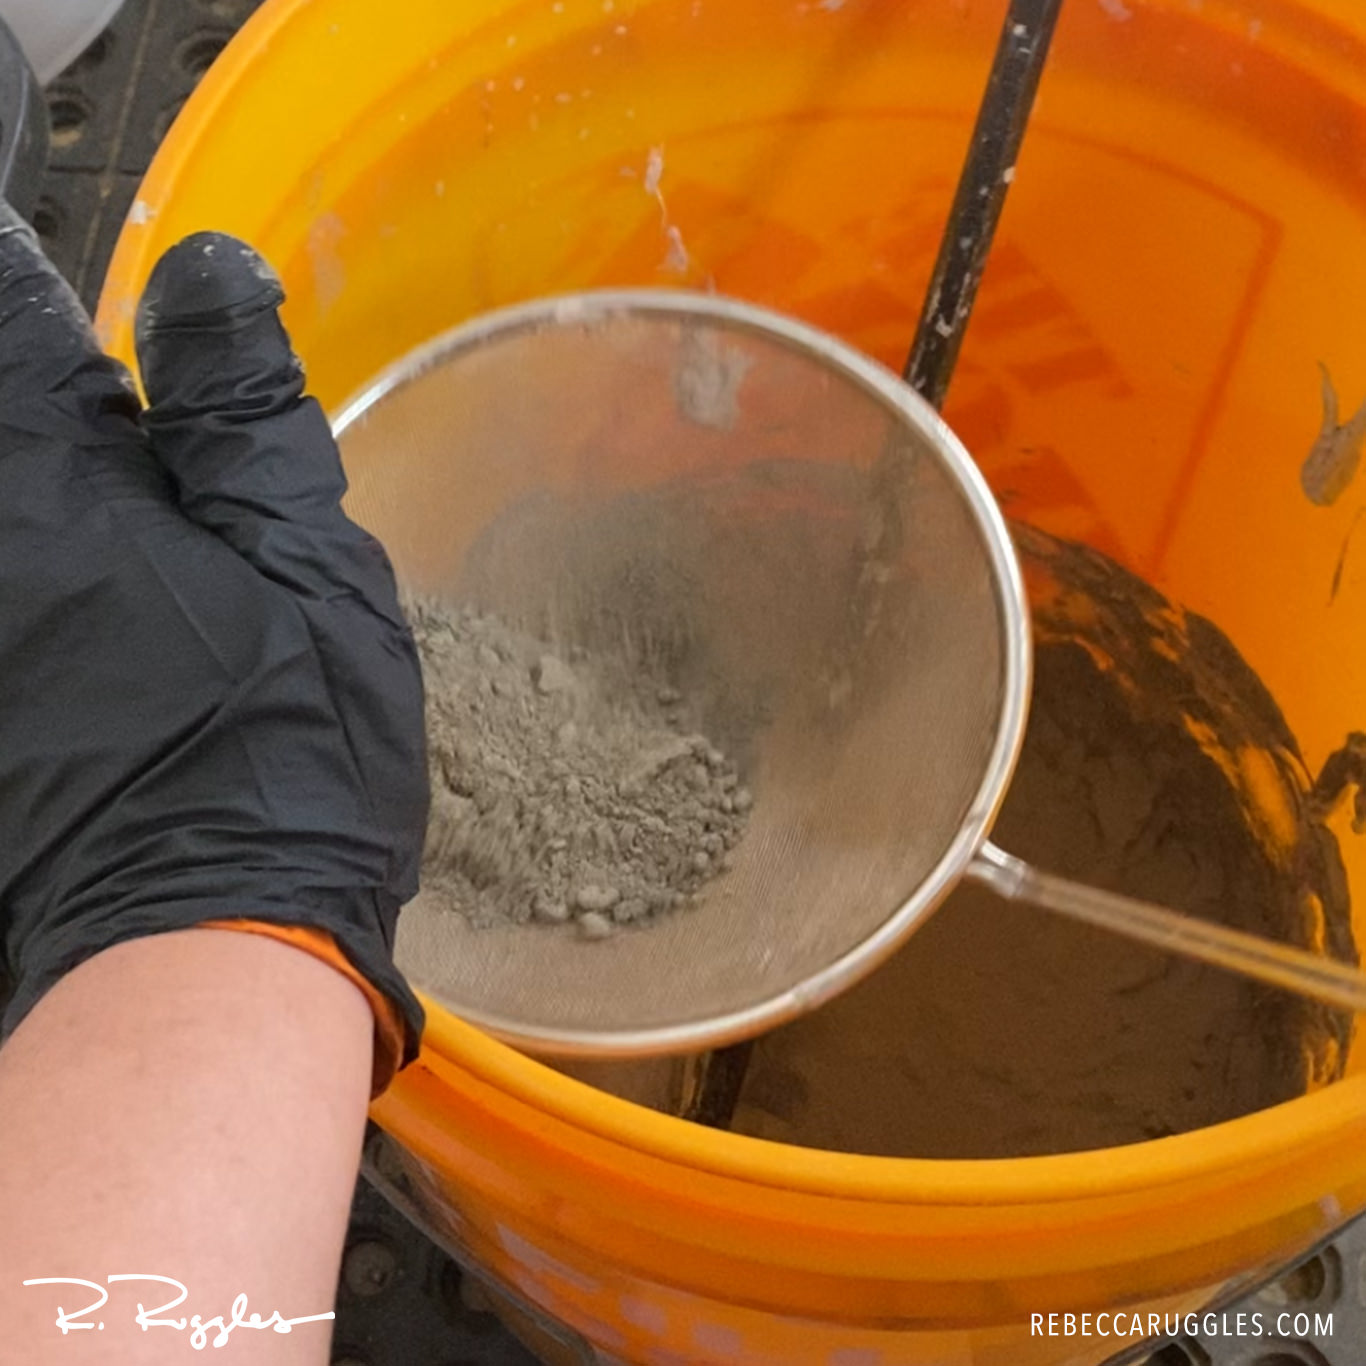 Sifting Portland cement to remove clumps in the clay.